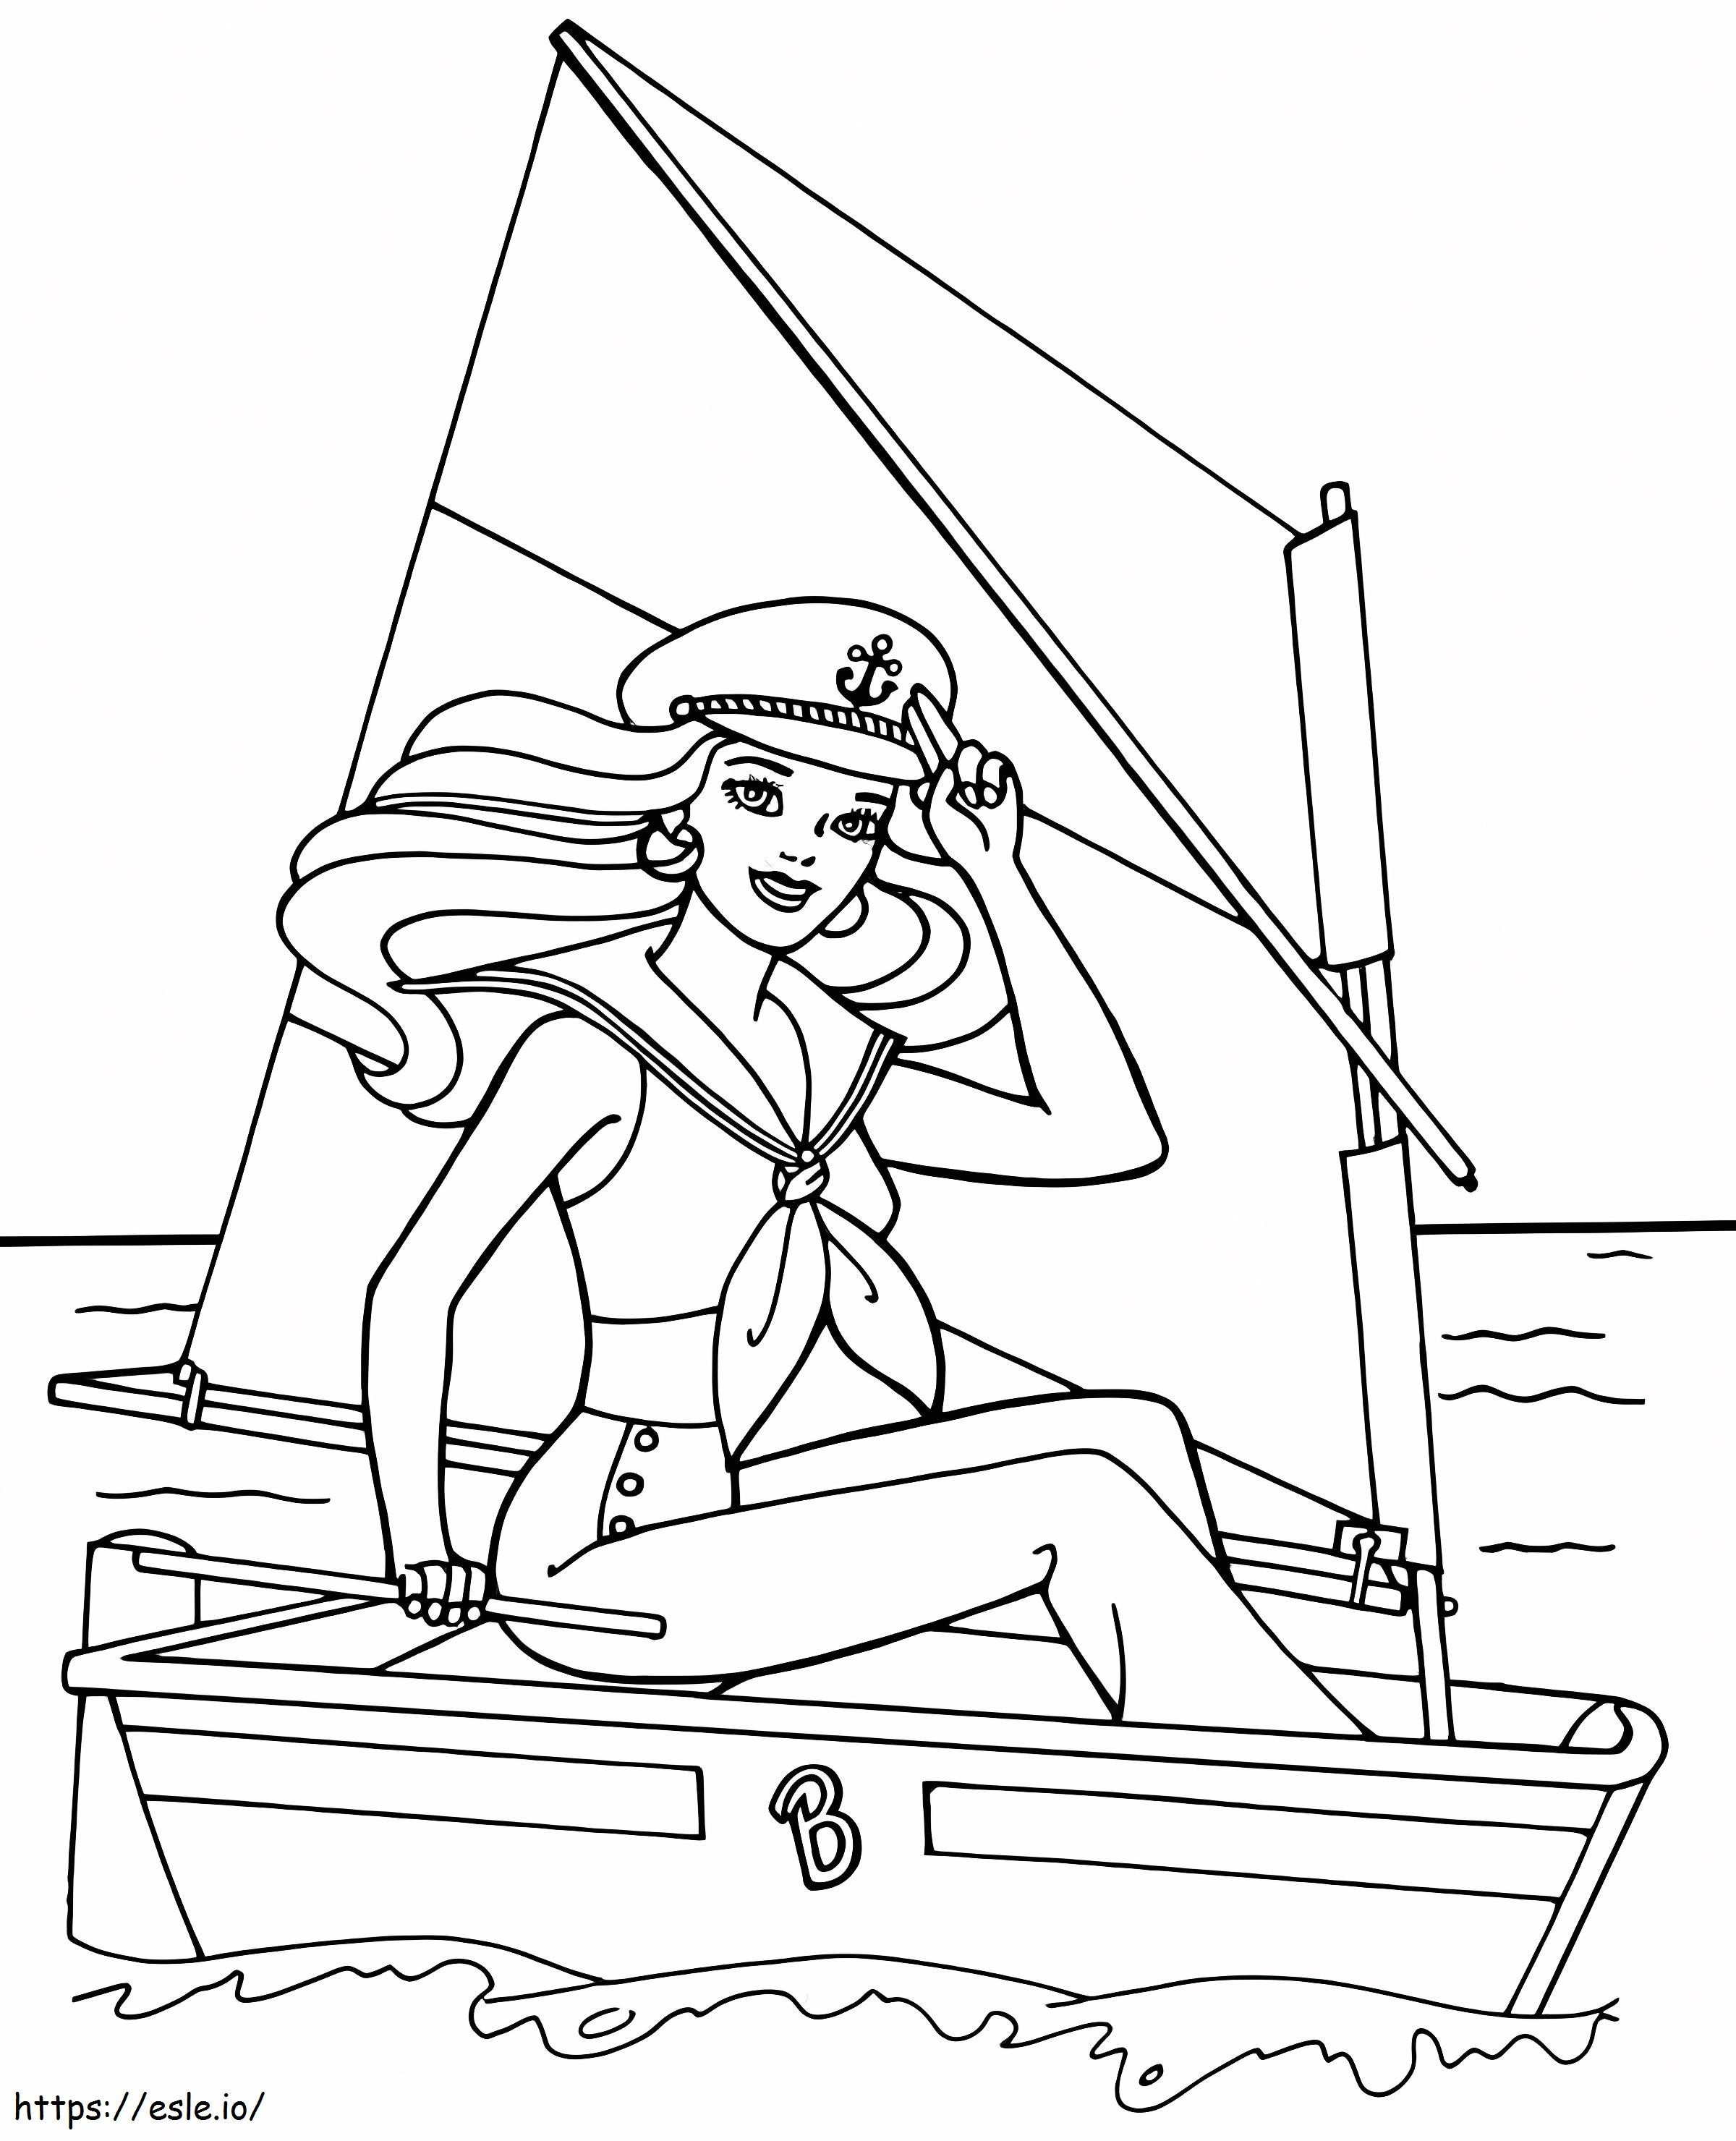 Barbie On Sailboat coloring page